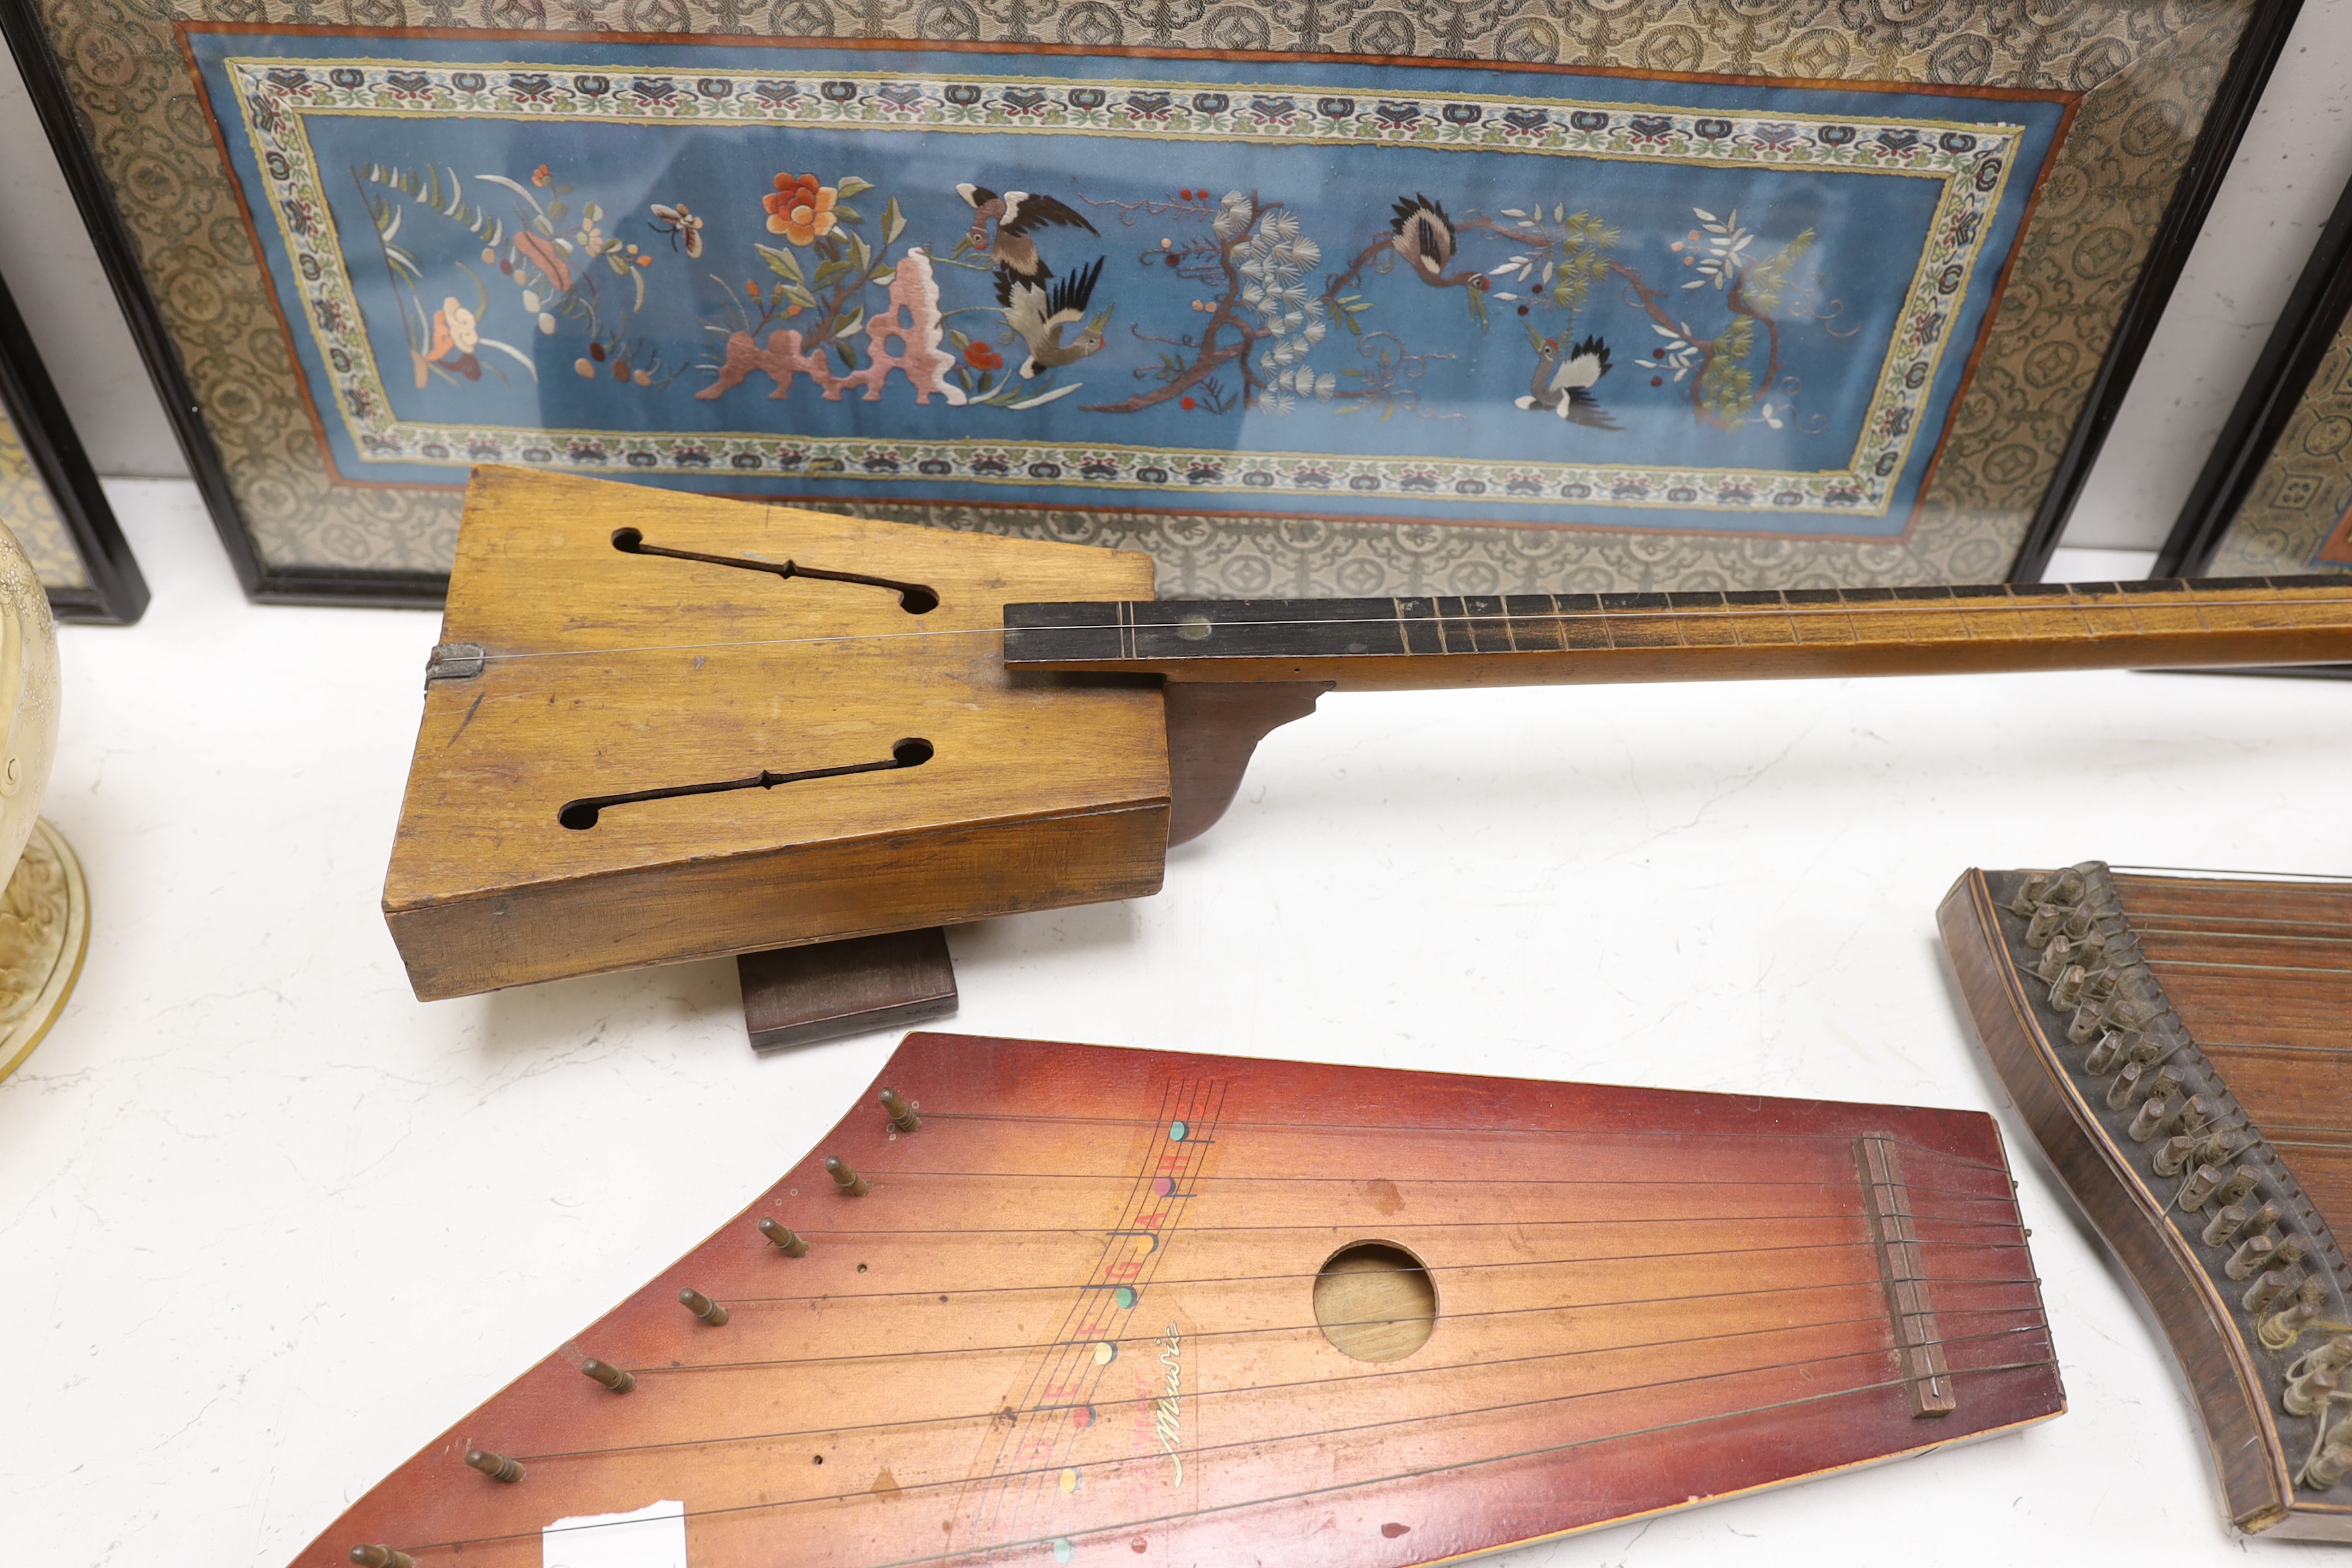 A single string fiddle, a zither and a Golden Music zither